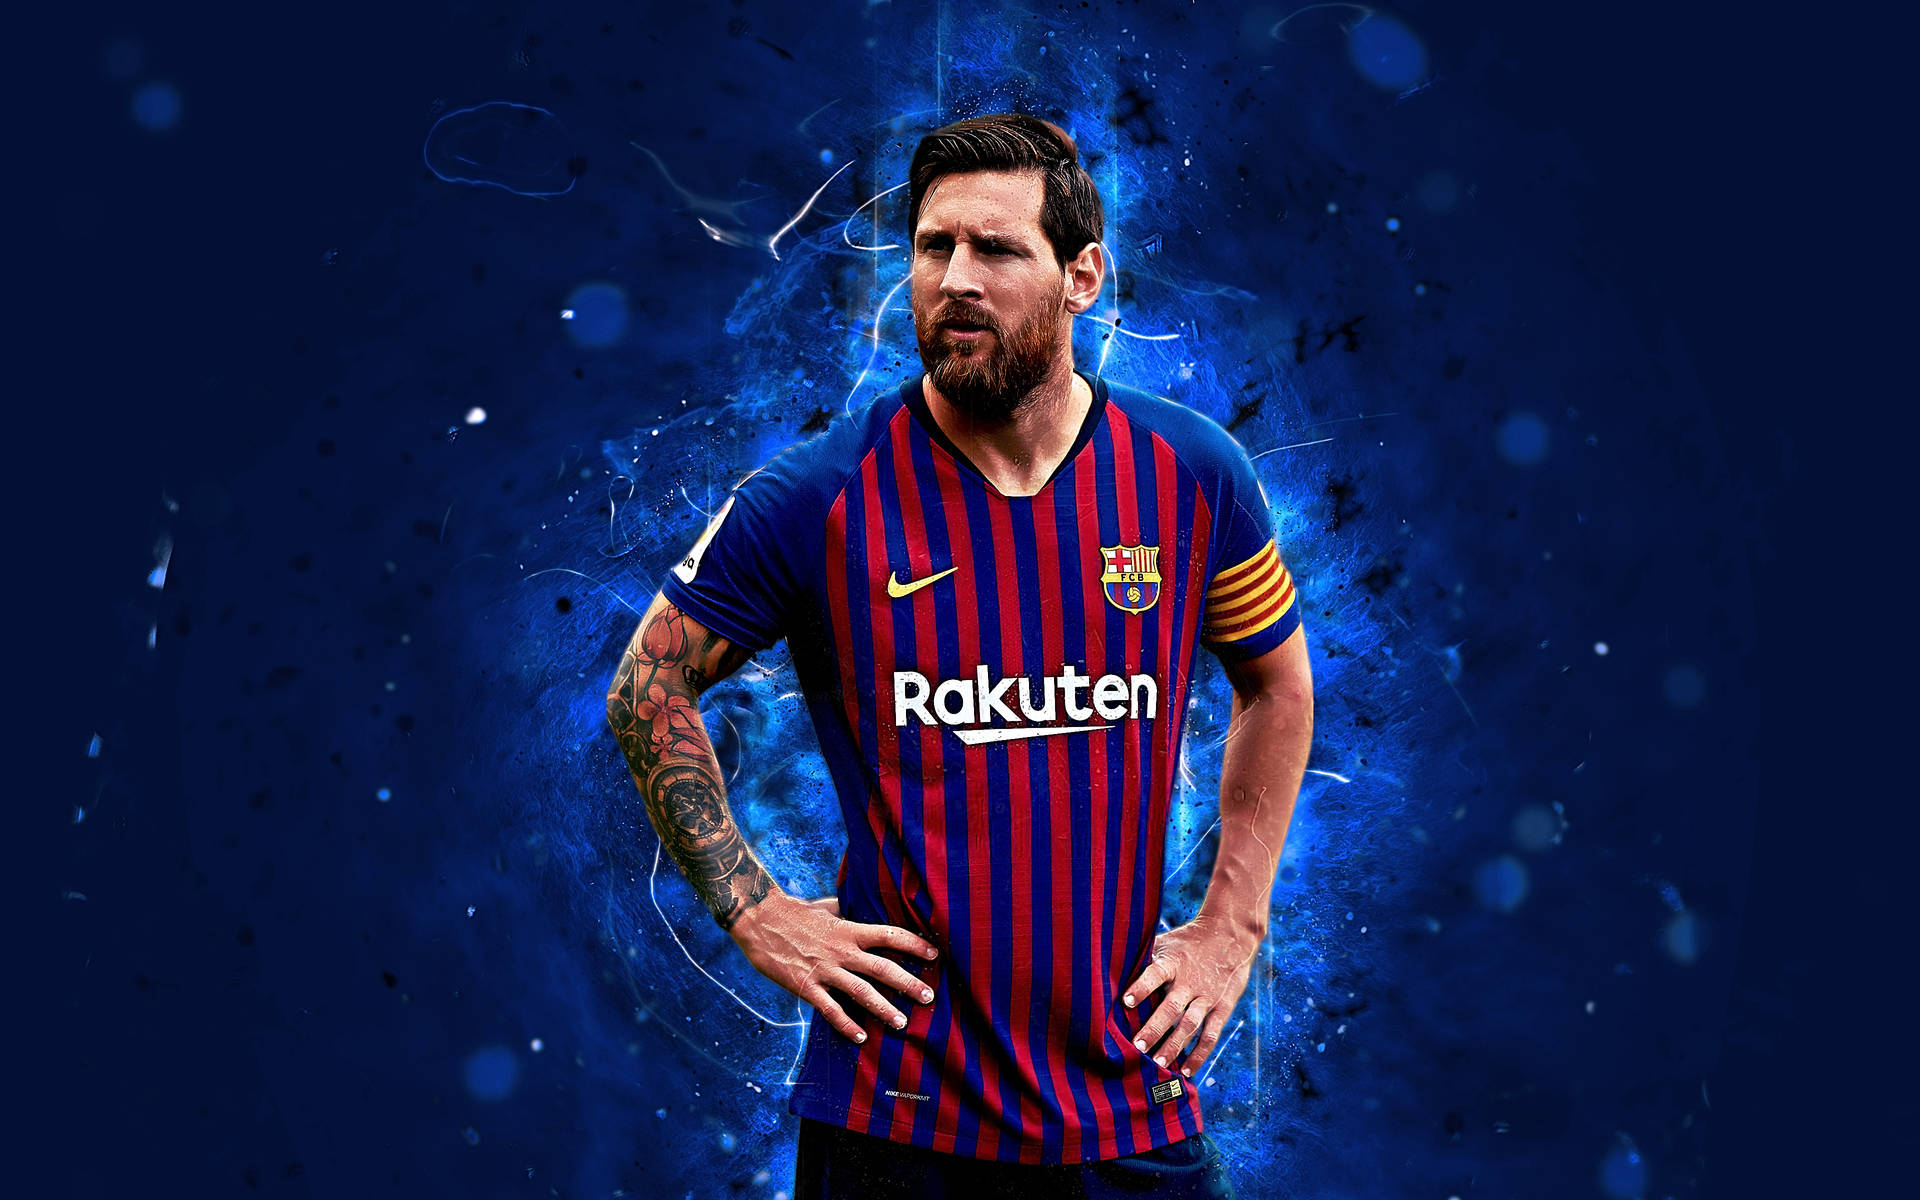 messi fast edit - video template by CapCut